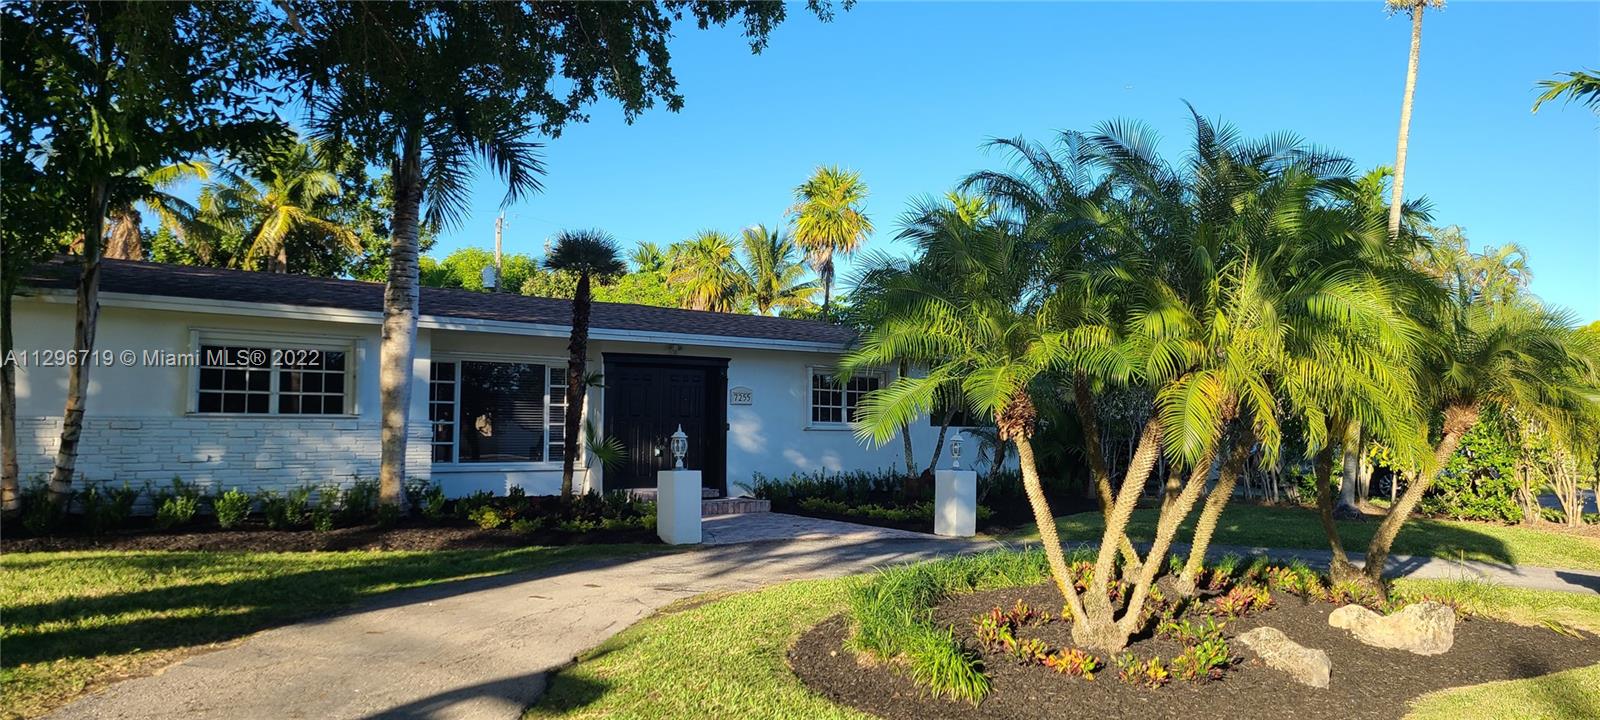 AN ABSOLUTE GEM IN HIGHLY DESIRABLE PINECREST! THIS 4 BEDROOM /2 BATH CORNER LOT HOME HAS IT ALL. PRIME LOCATION, POOL, COVERED PATIO, LUSH LANDSCAPING, LARGE FENCED BACKYARD, SPACIOUS BEDROOMS, WALK-IN CLOSETS.